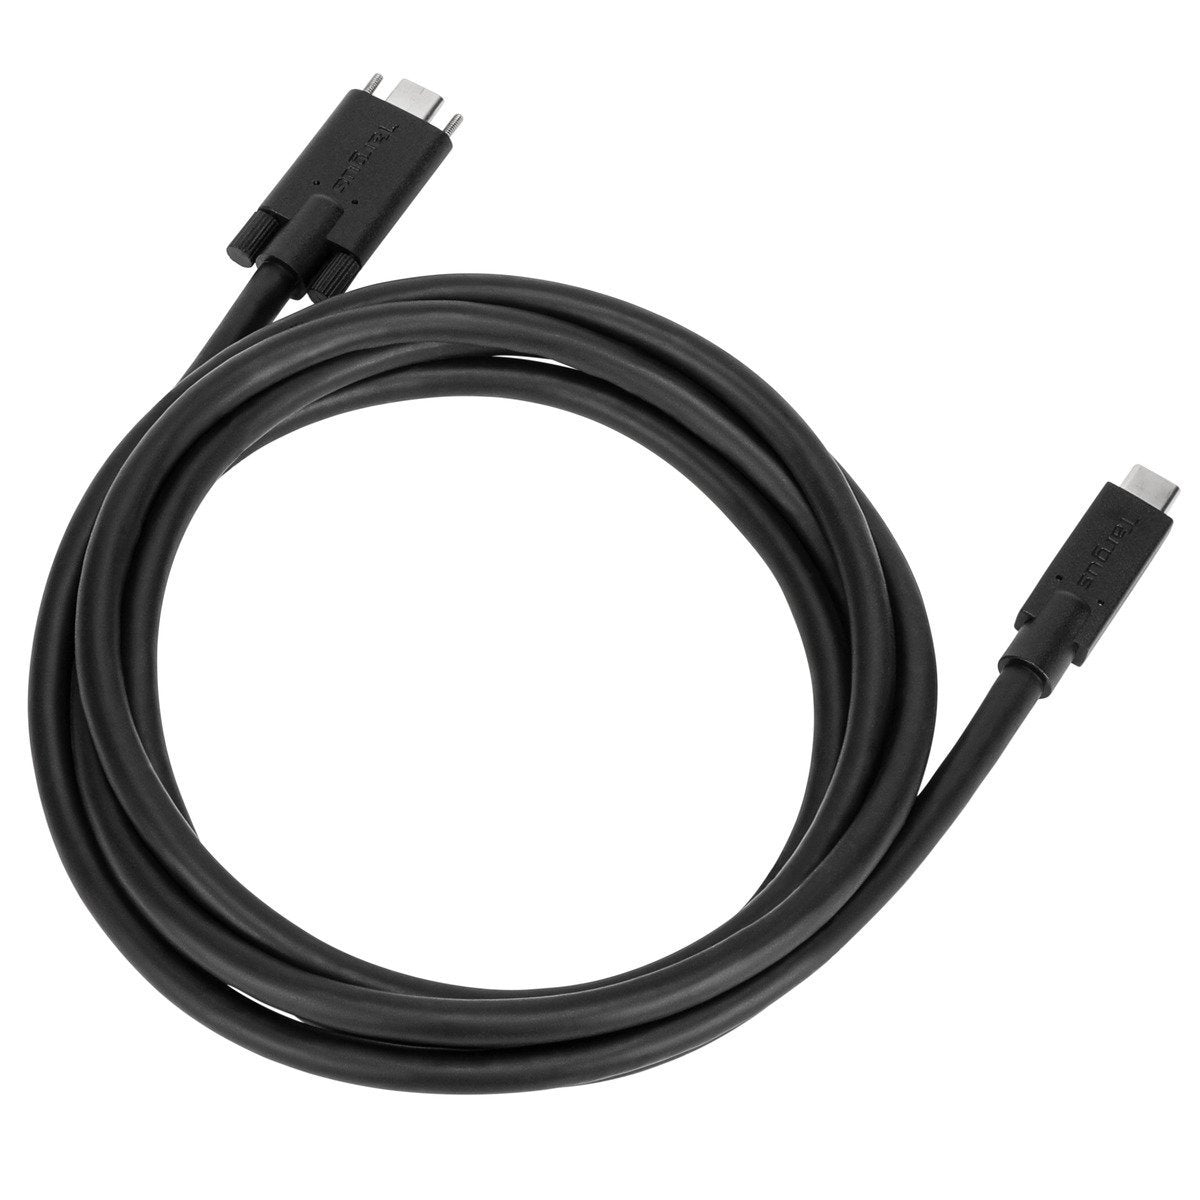 1-Meter USB-C to USB-B 15bps Cable - ACC924USX: Cables & Adapters